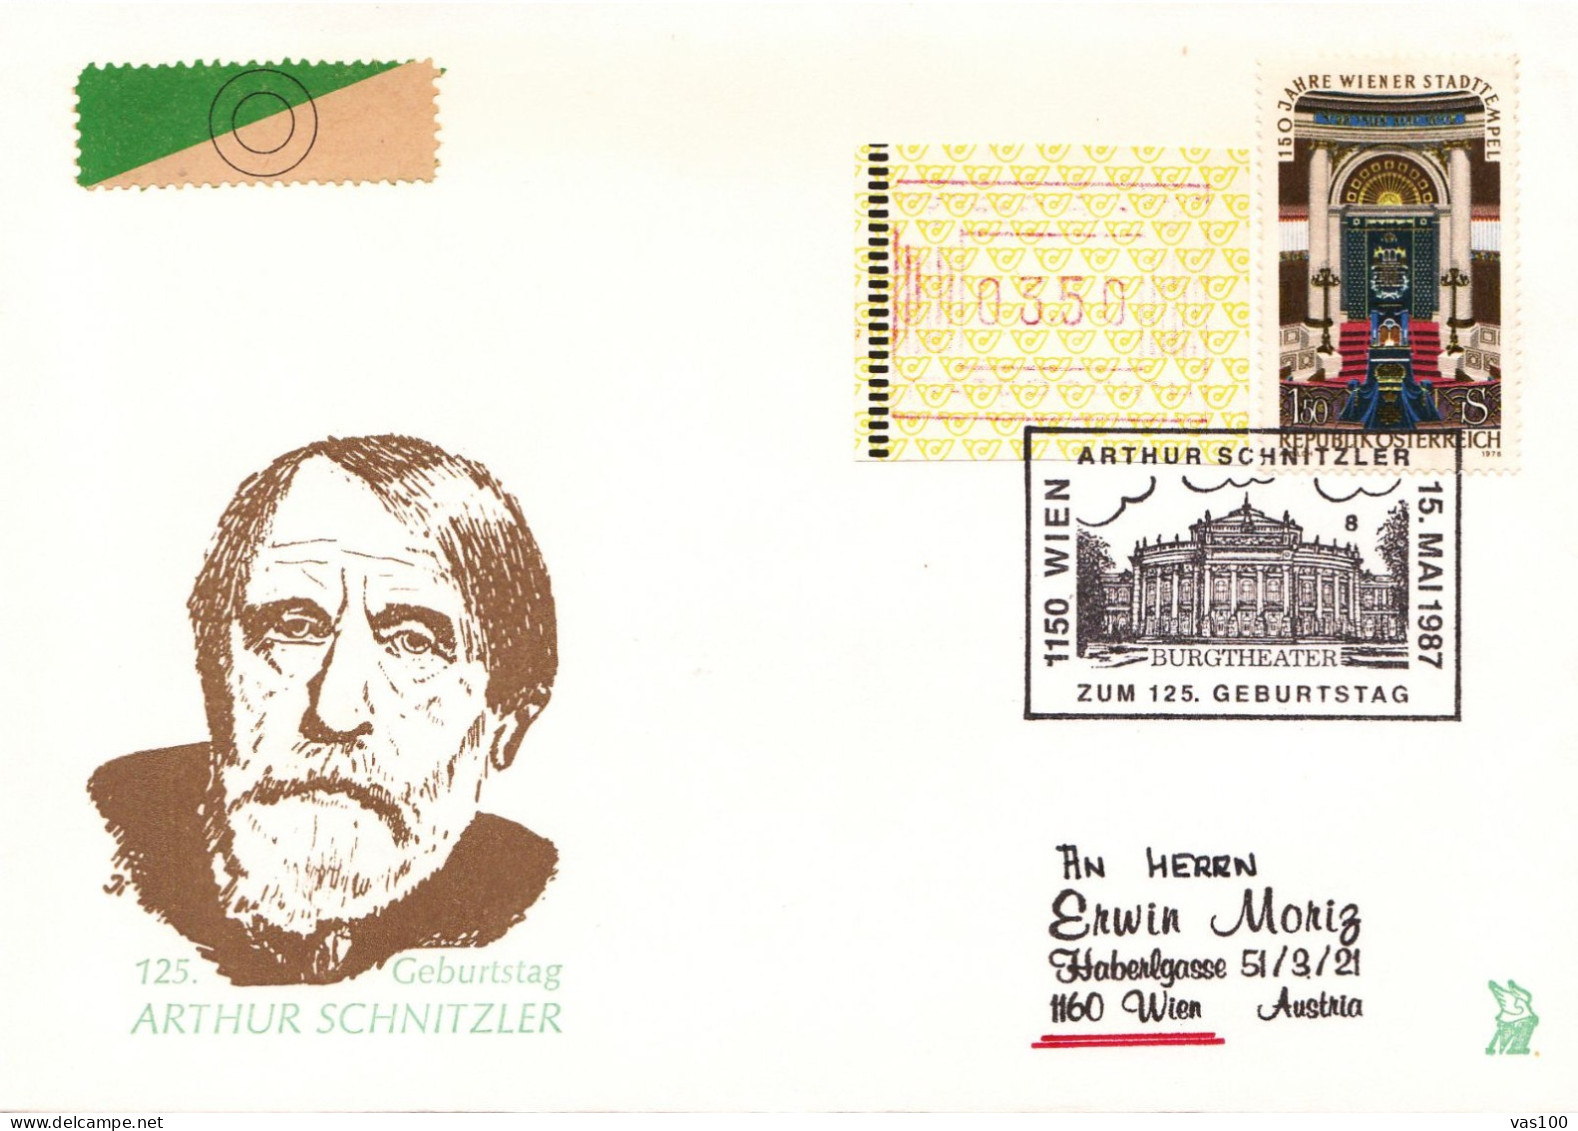 AUSTRIA POSTAL HISTORY / BURGTHEATER, 15.05.1987 - Covers & Documents